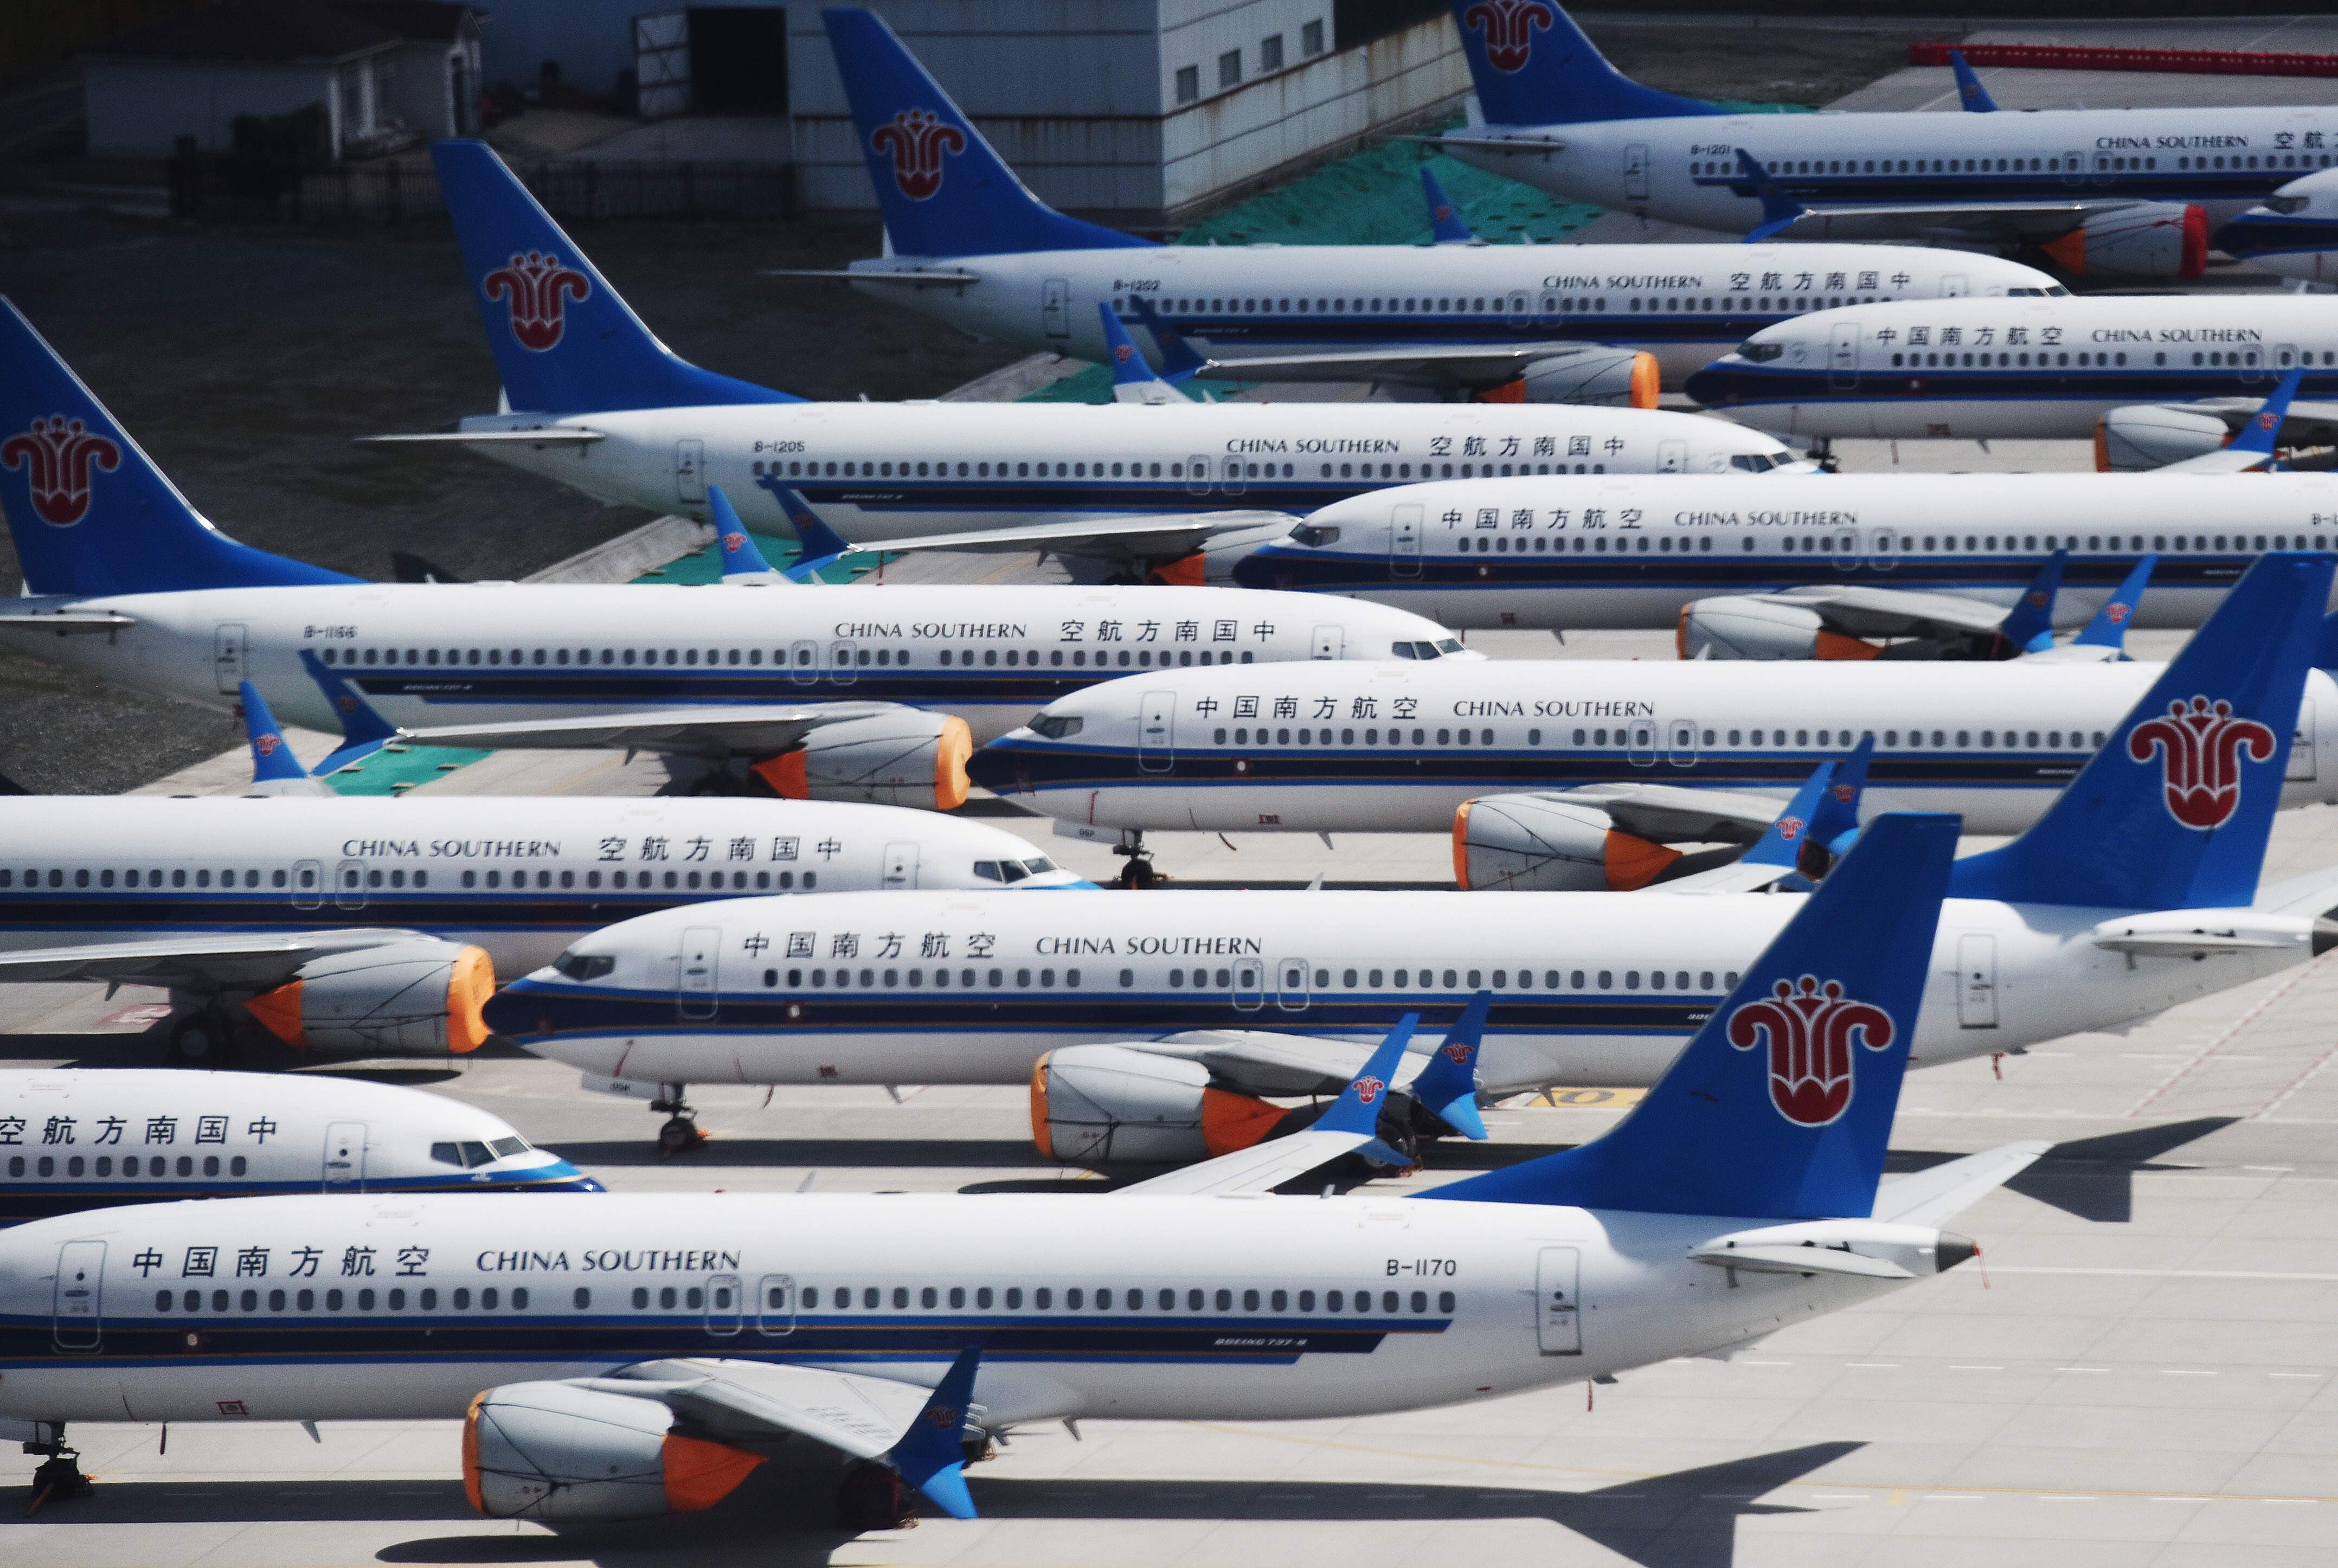 China Southern Airlines Boeing 737 MAX aircraft parked in a line at Urumqi airport, in China's western Xinjiiang region. Photo: AFP